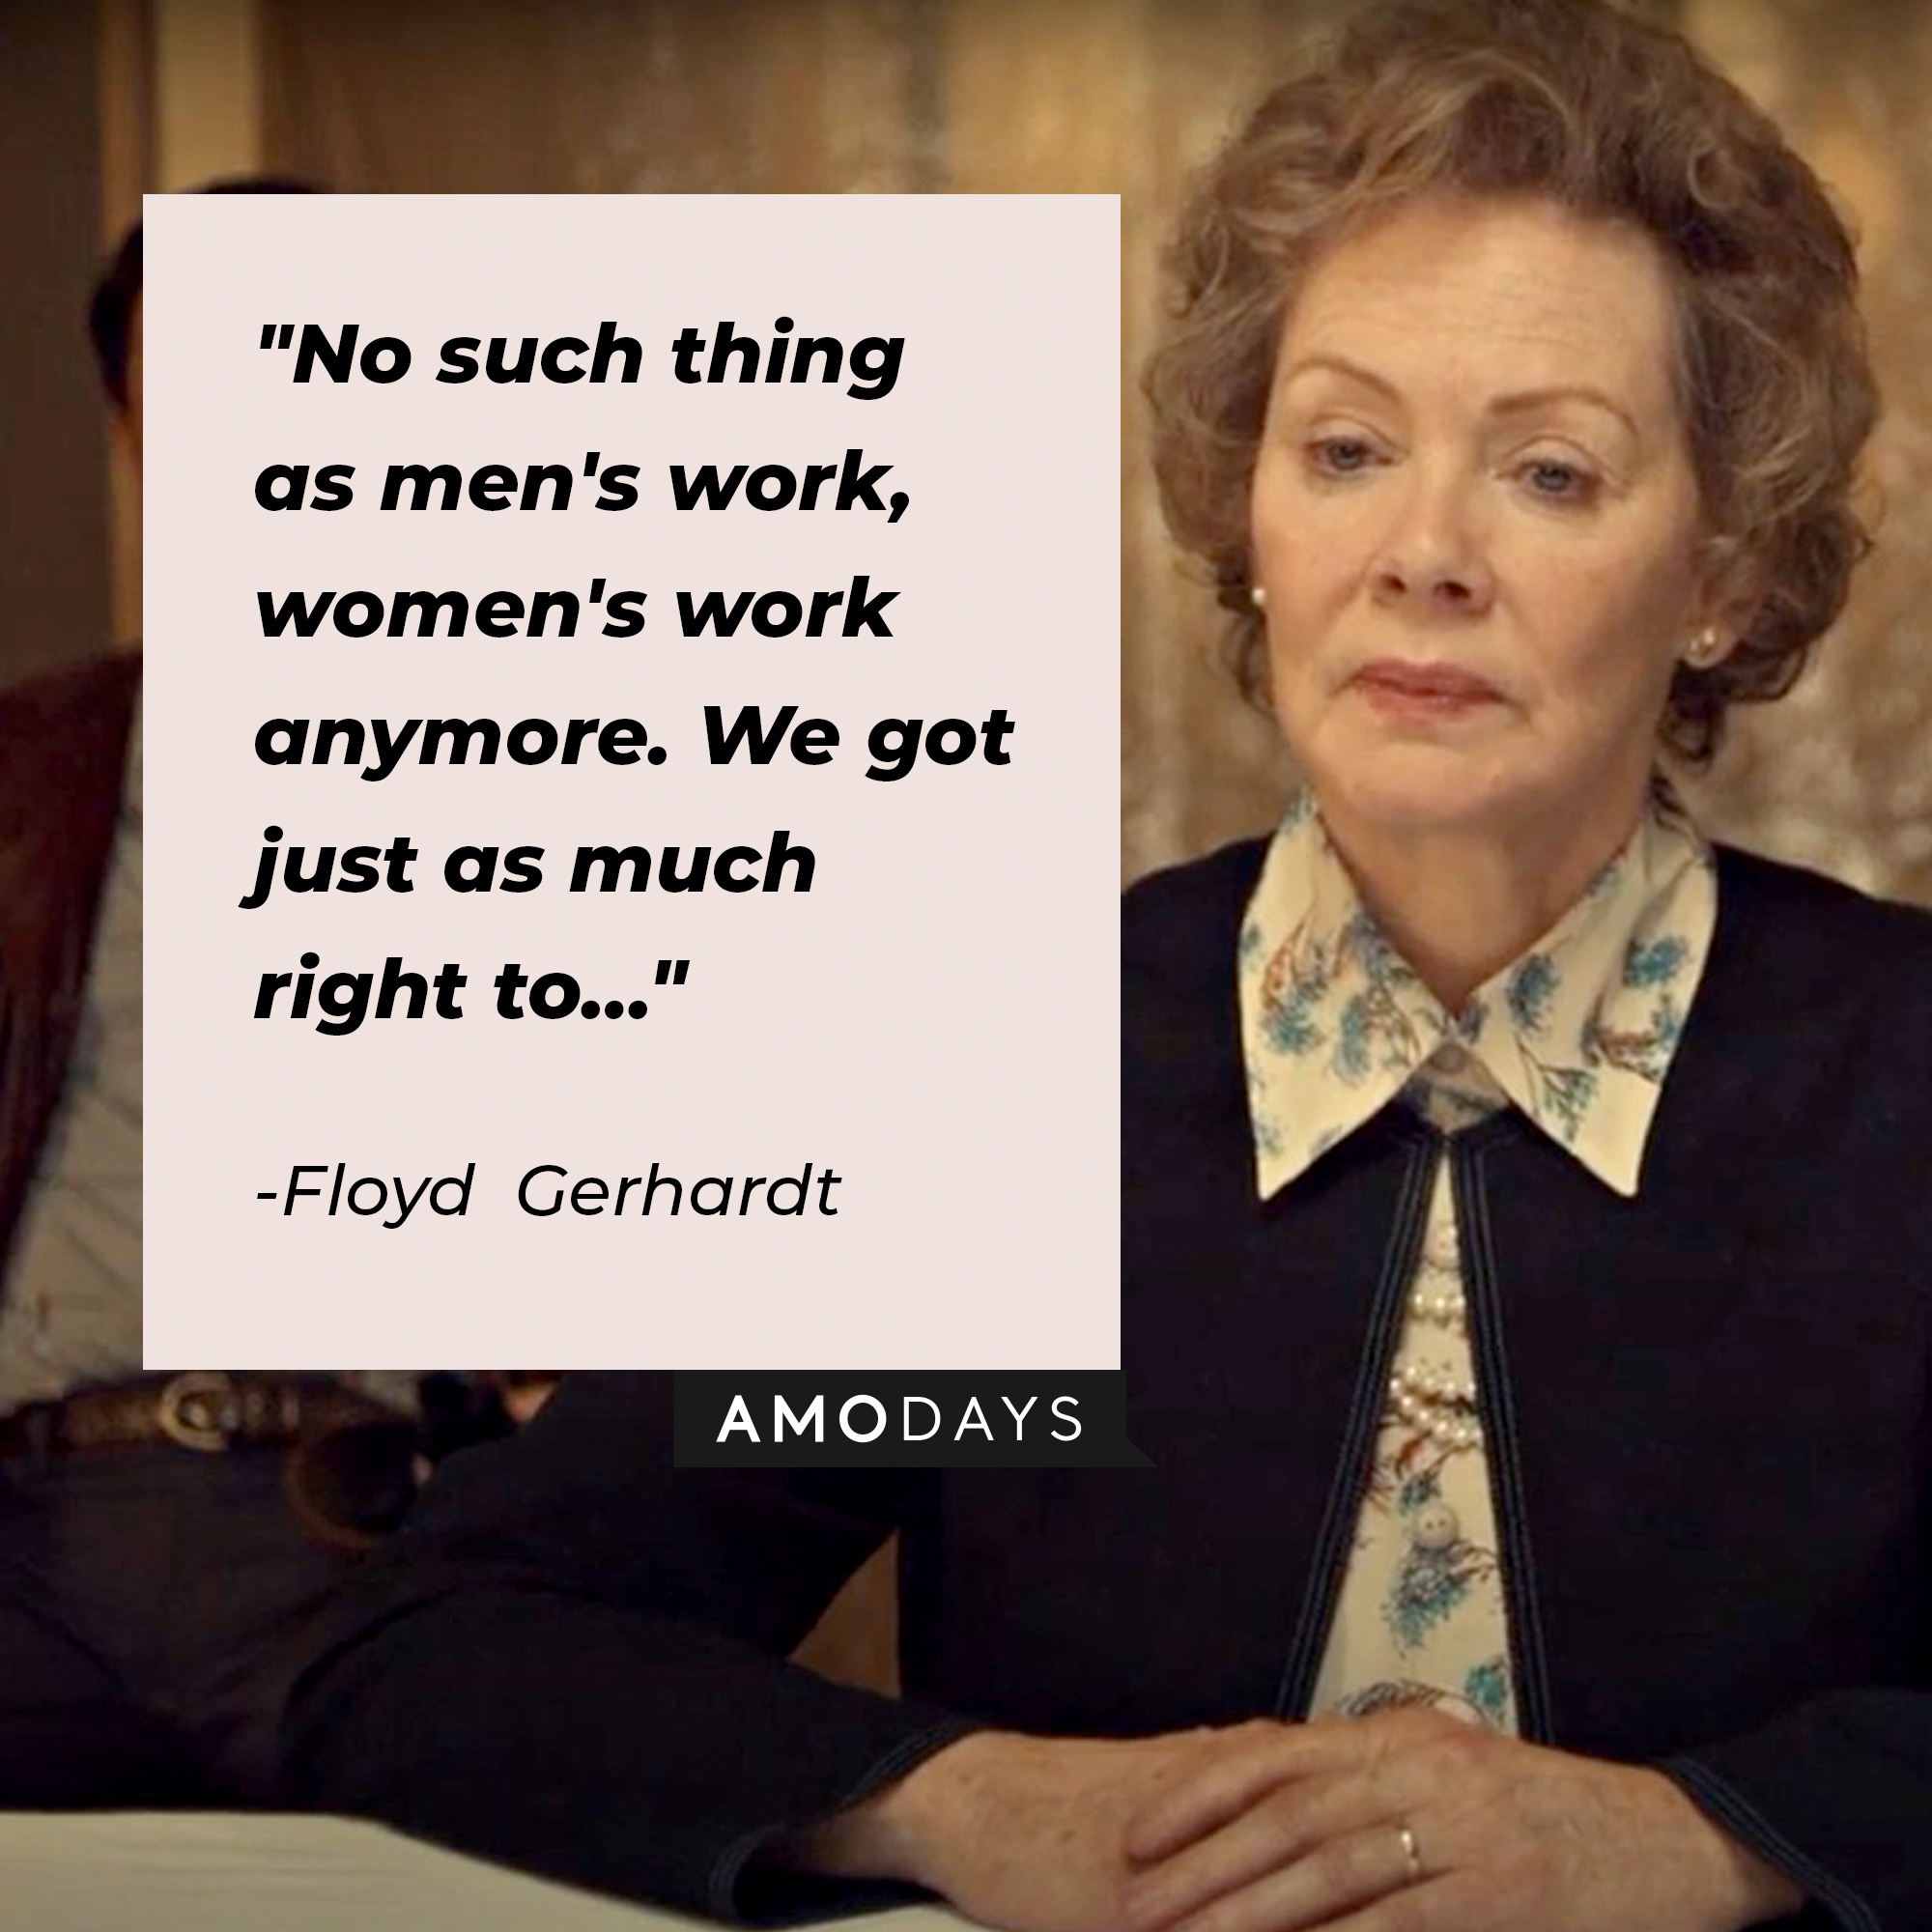 Floyd Gerhard, with her quote: “No such thing as men's work, women's work anymore. We got just as much right to…” |Source:   youtube.com/Netflix